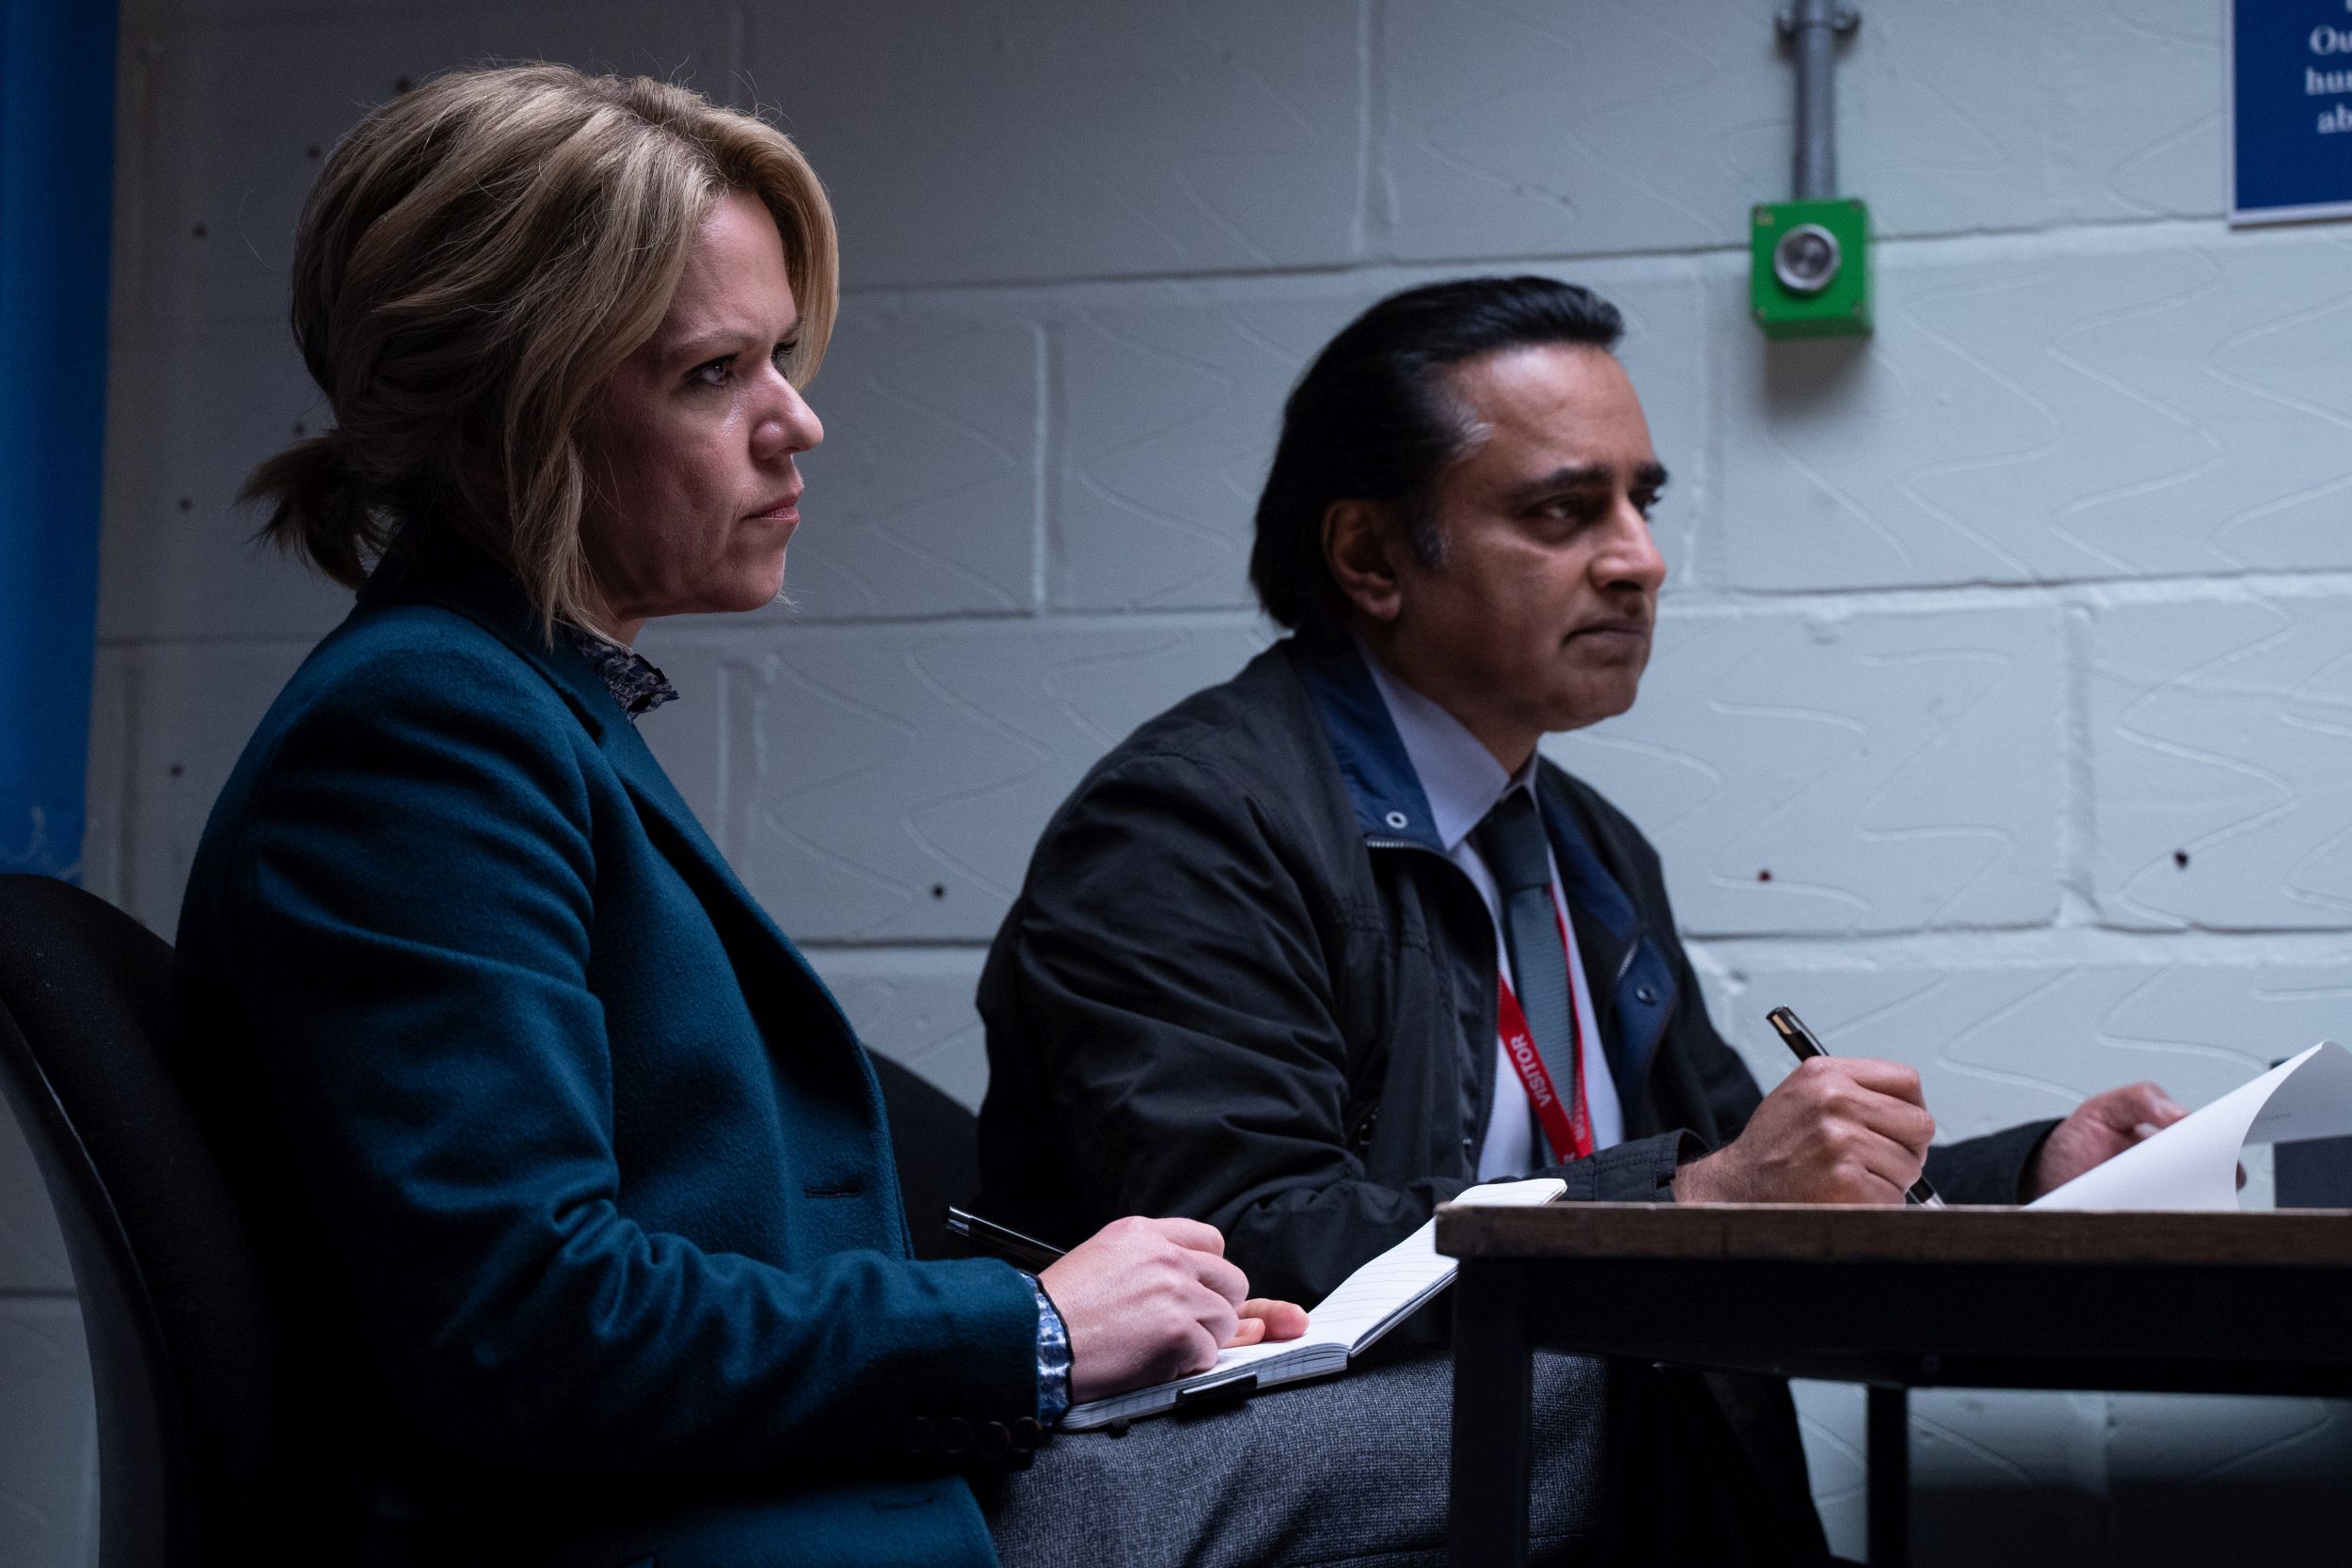 Sinead Keenan as DCI Jess James and Sanjeev Bhaskar as DI Sunny Khan are the team work that make the dream work in the interrogation room in 'Unforgotten' Season 5